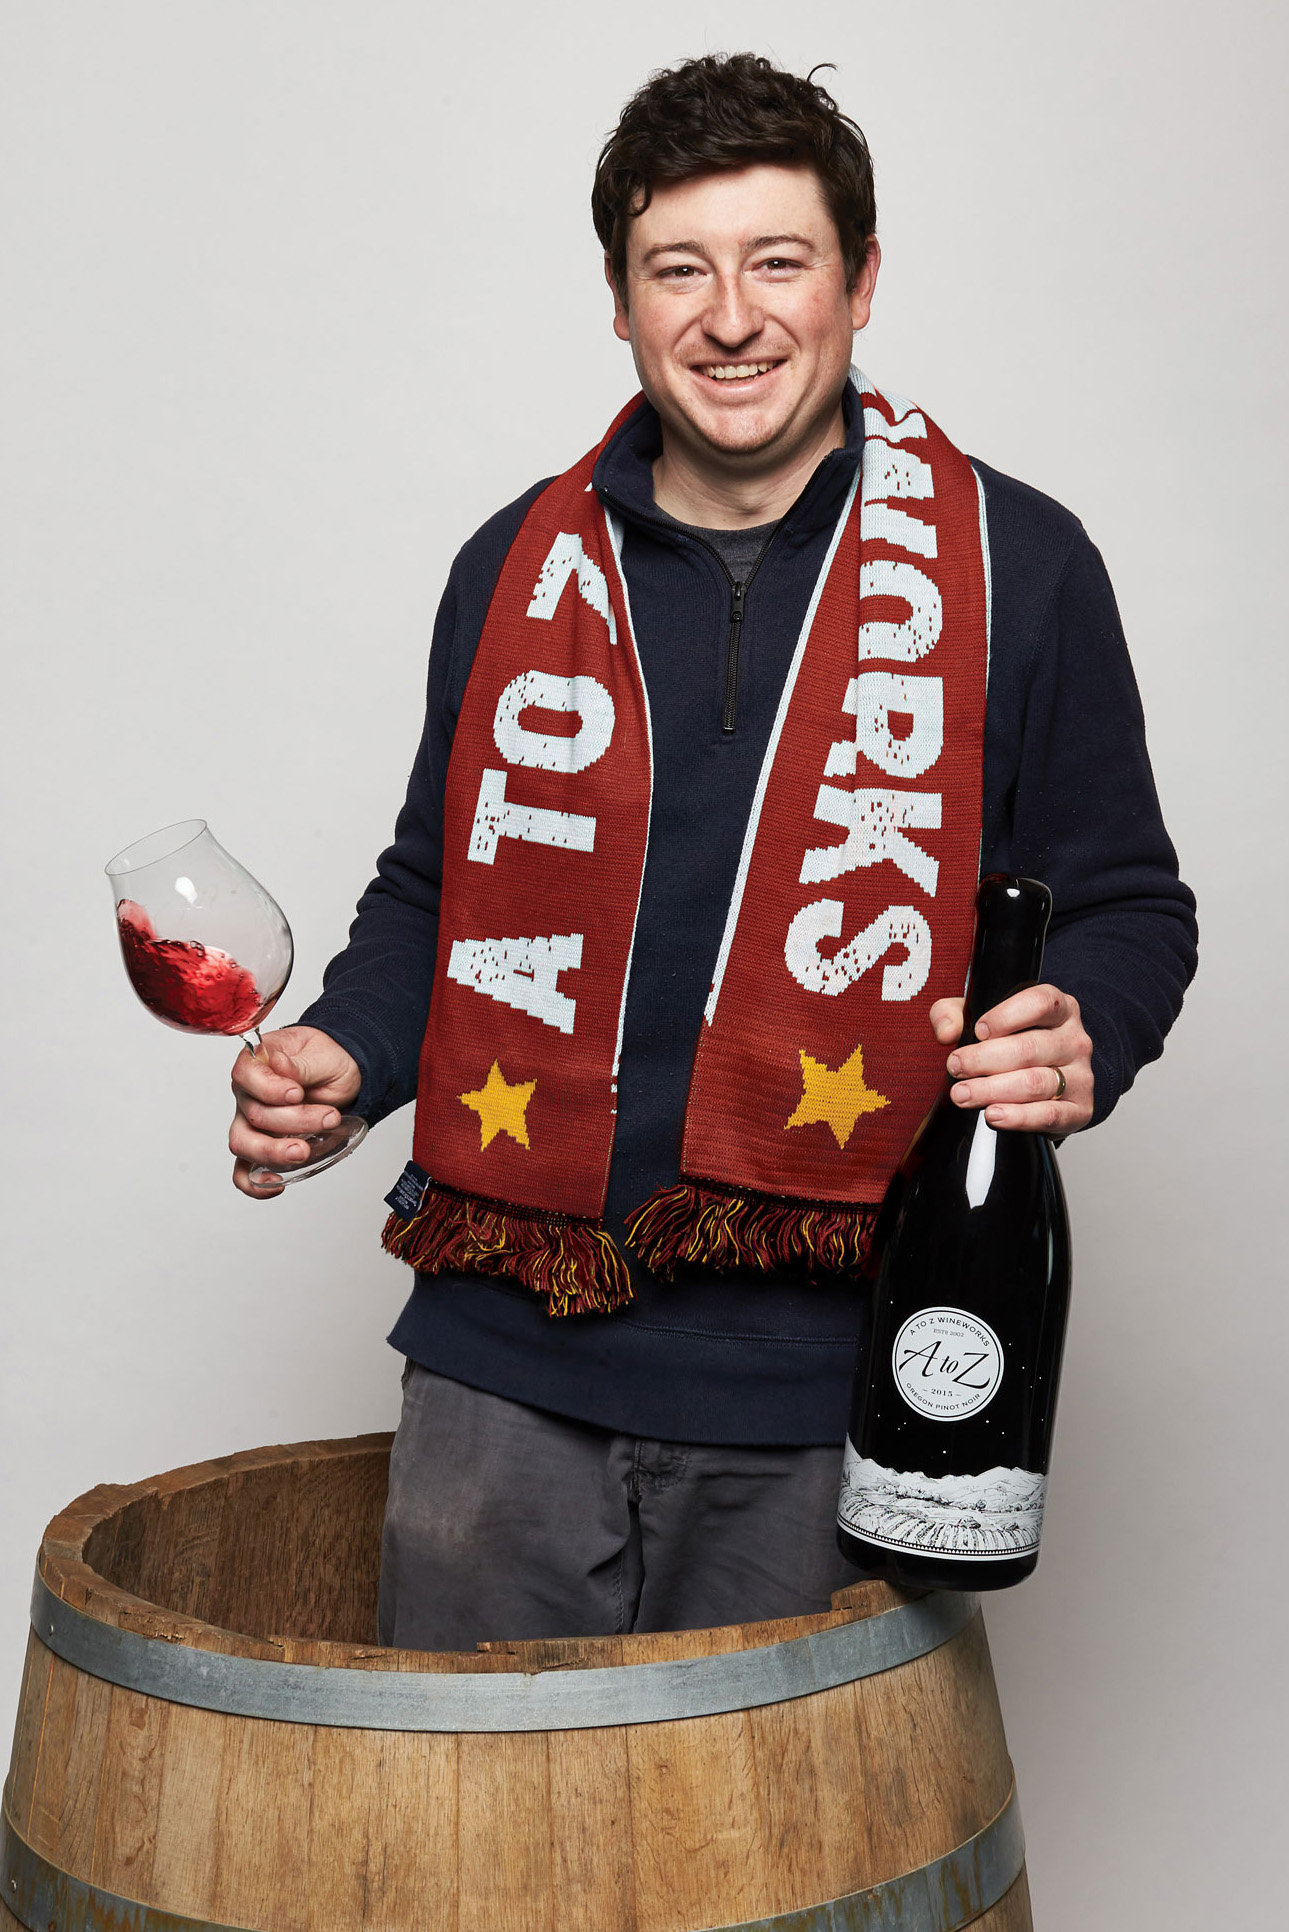 Fred in barrel with wine bottle and wine glass, wearing A to Z scarf